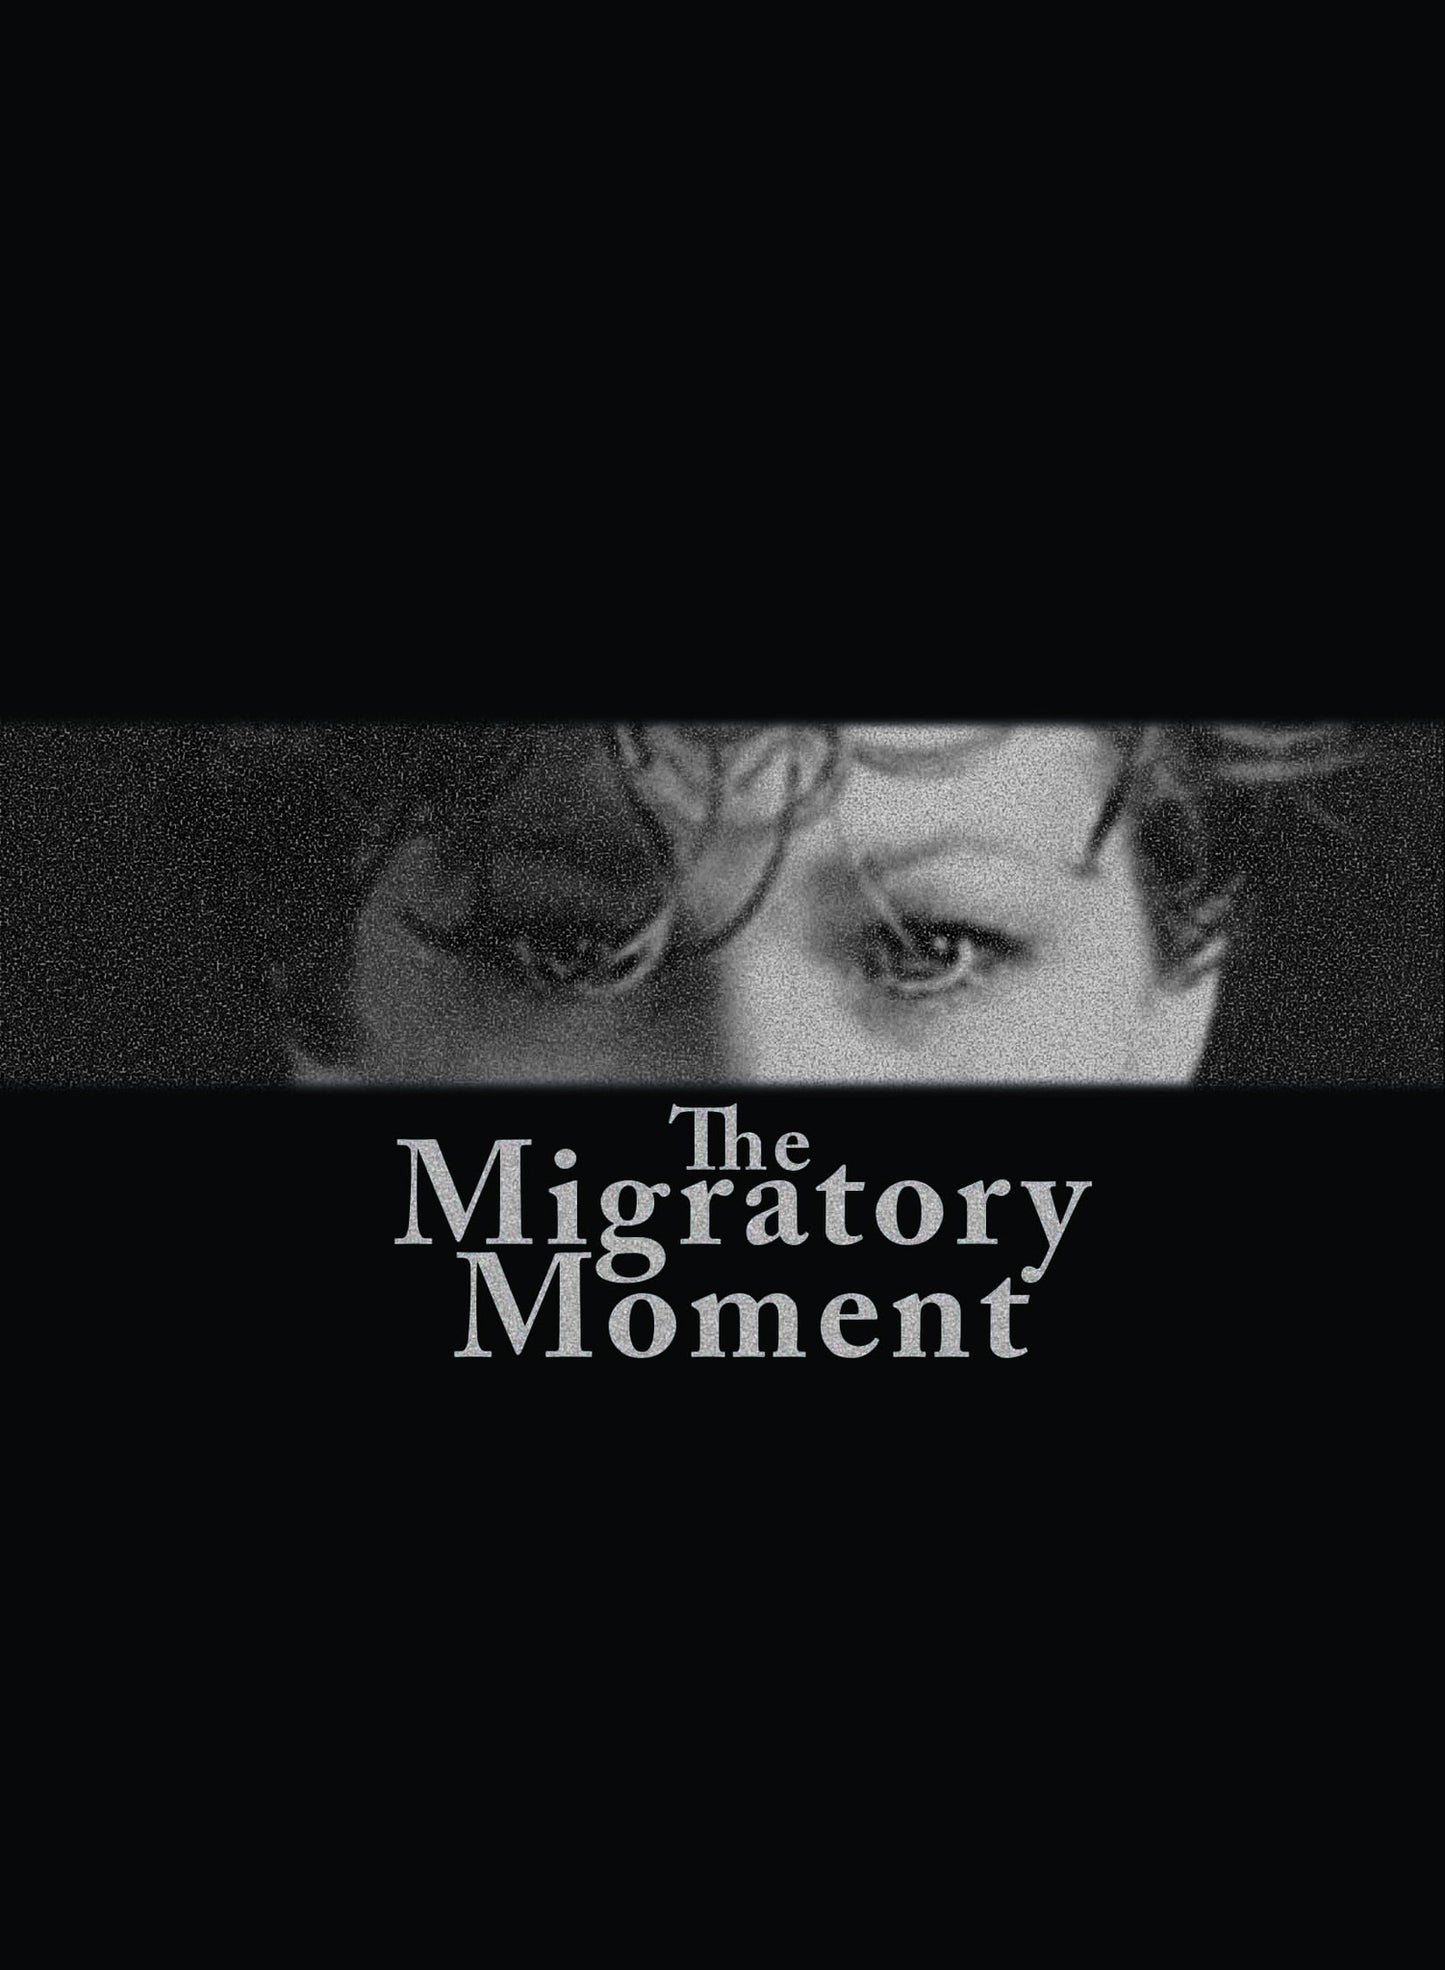 The Migratory Moment